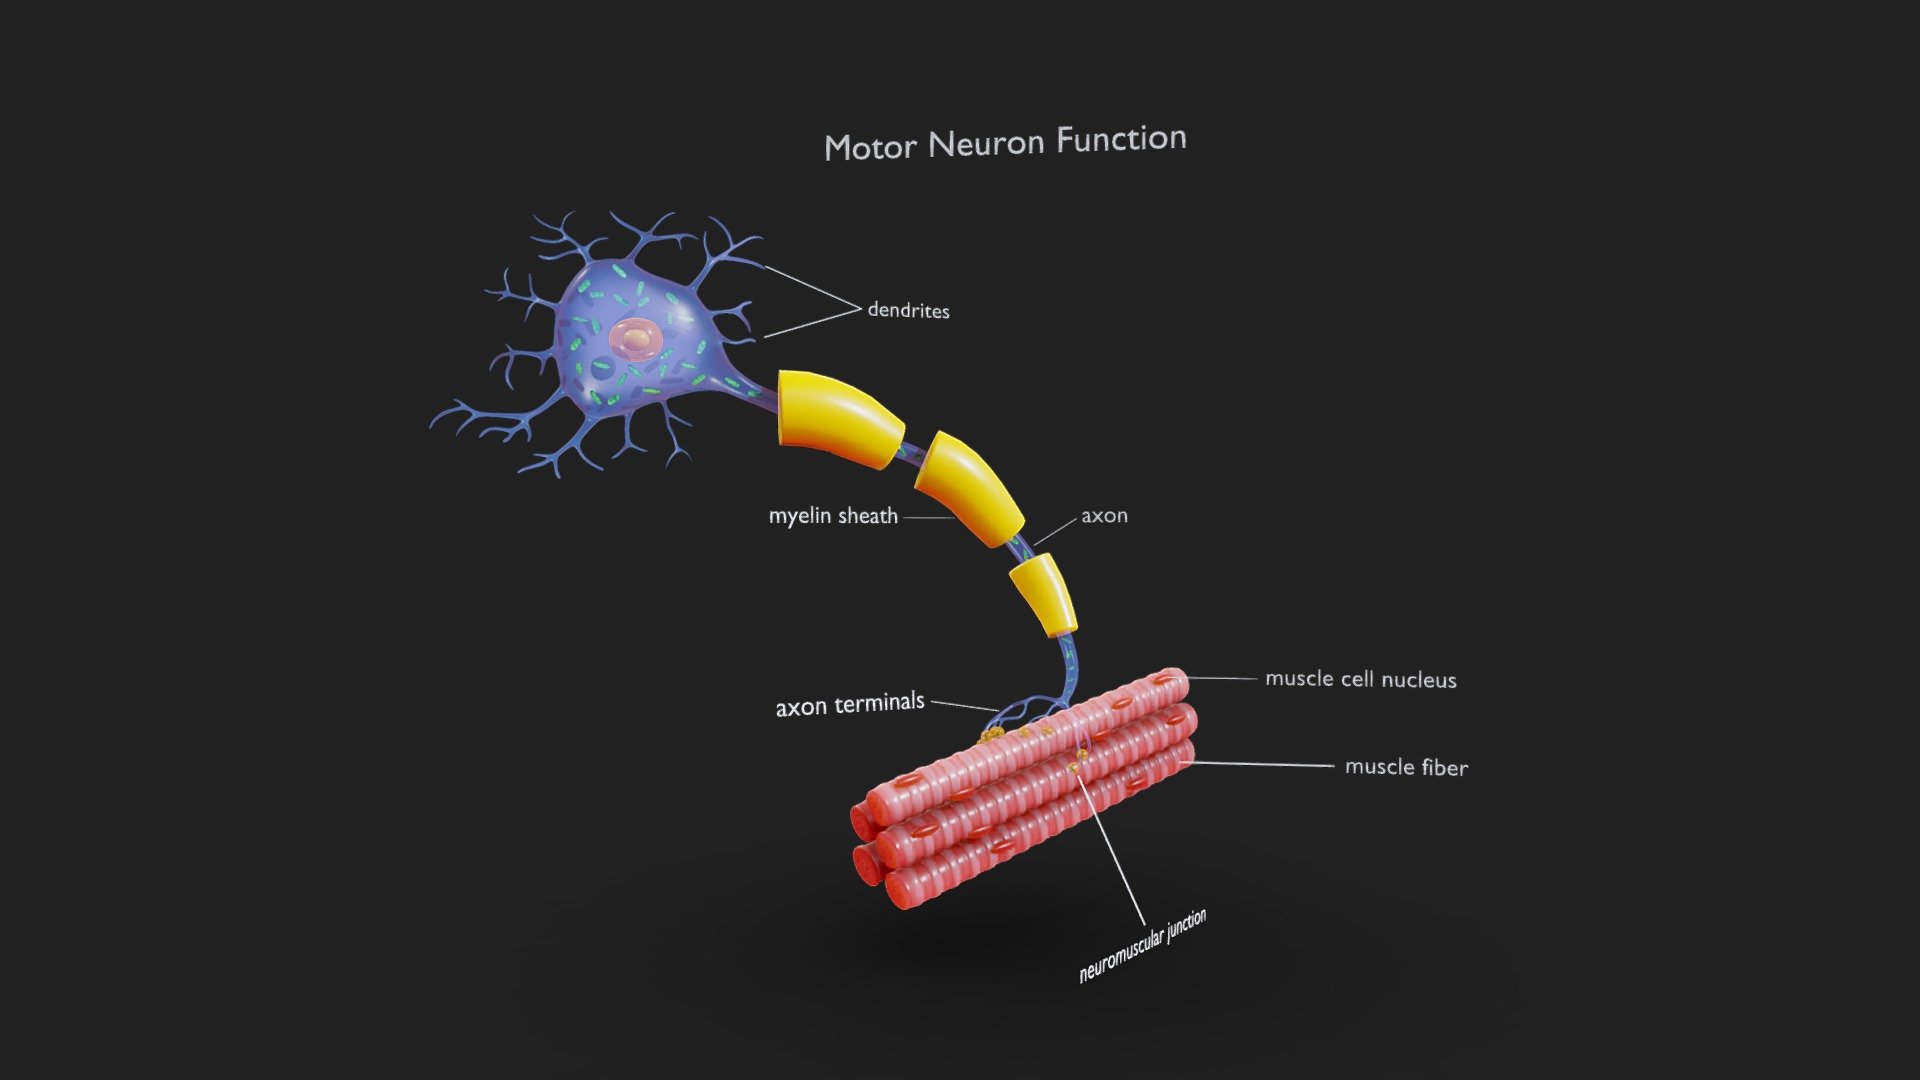 Motor Neuron Function

Motor neurons transmit signals from the central nervous system to muscles, enabling voluntary movements and controlling various bodily functions. Dysfunction of motor neurons can lead to conditions like ALS (amyotrophic lateral sclerosis) or spinal muscular atrophy.




Format: FBX, OBJ, MTL, STL, glb, glTF, Blender v4.0.0

Optimized UVs

PBR Textures | 1024x1024 - 2048x2048 - 4096x4096 | (1K, 2K, 4K - Jpeg, Png)

Base Color (Albedo)

Normal Map

AO Map

Metallic Map

Roughness Map

Height Map

Opacity Map
 - Motor Neuron Function - Buy Royalty Free 3D model by Nima (@h3ydari96) 3d model